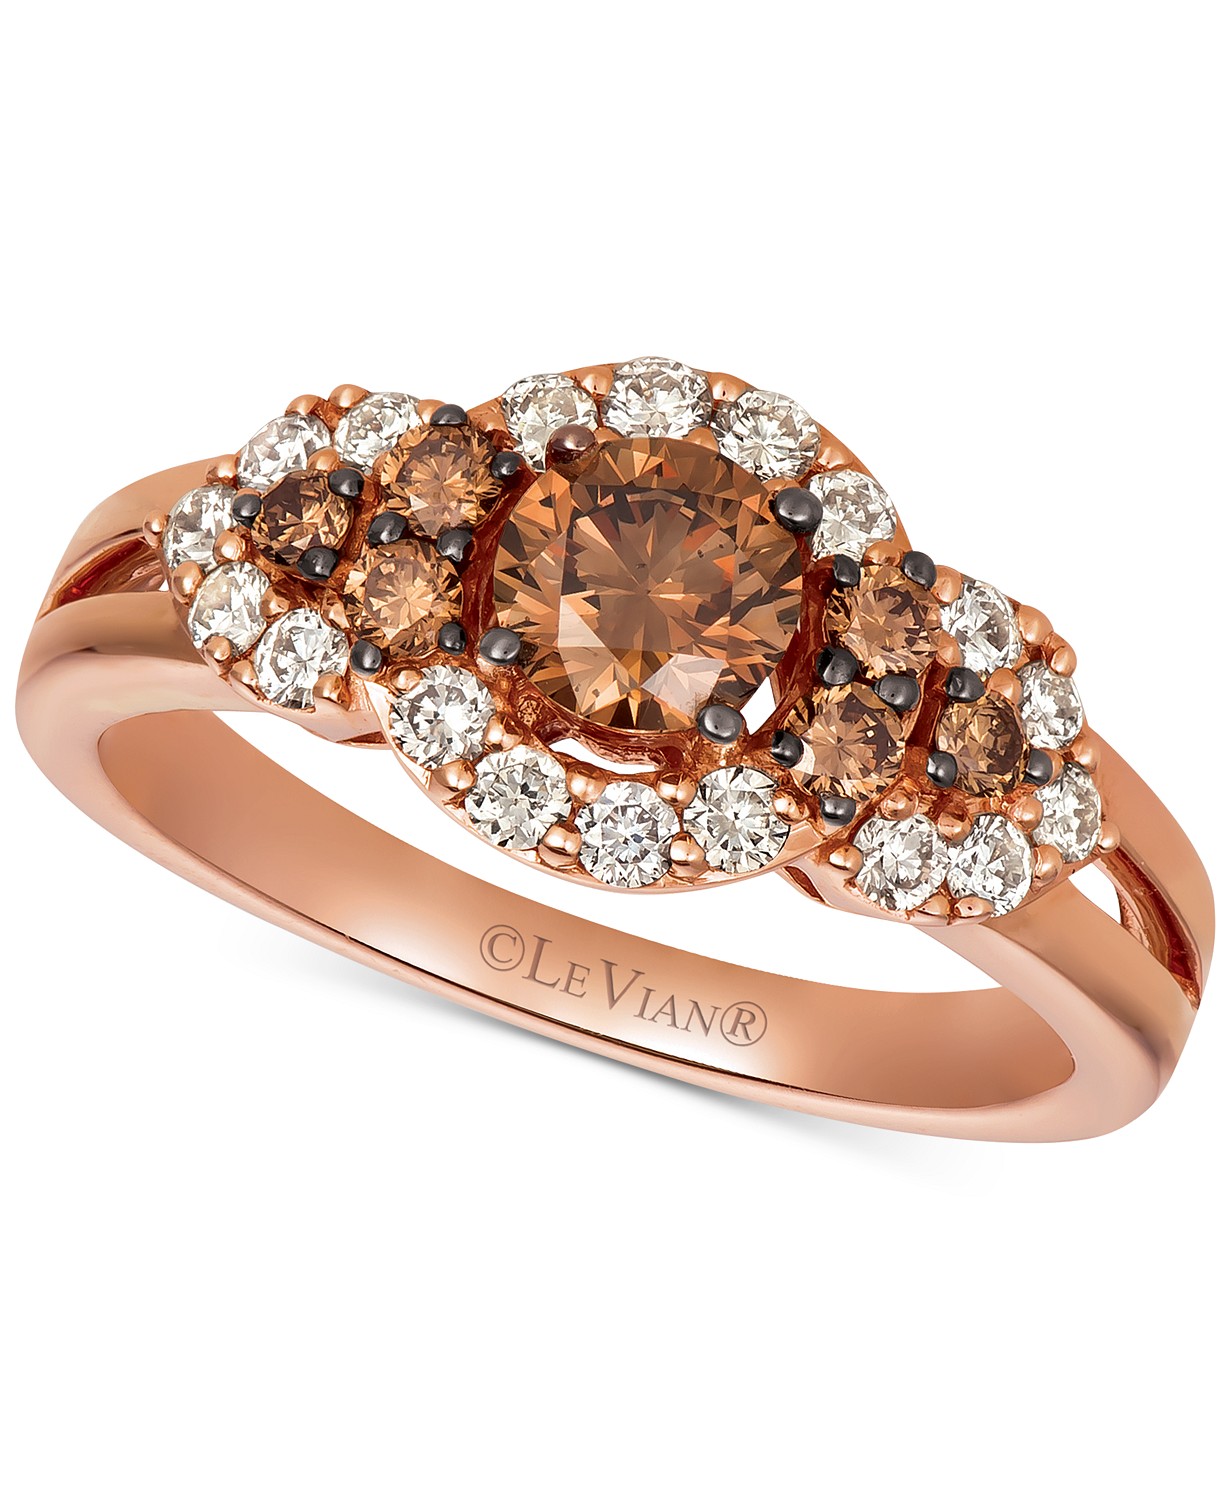 Chocolate Diamond 3.57 Ct 18K Rose Gold Over Wedding Engagement Ring For Women's 